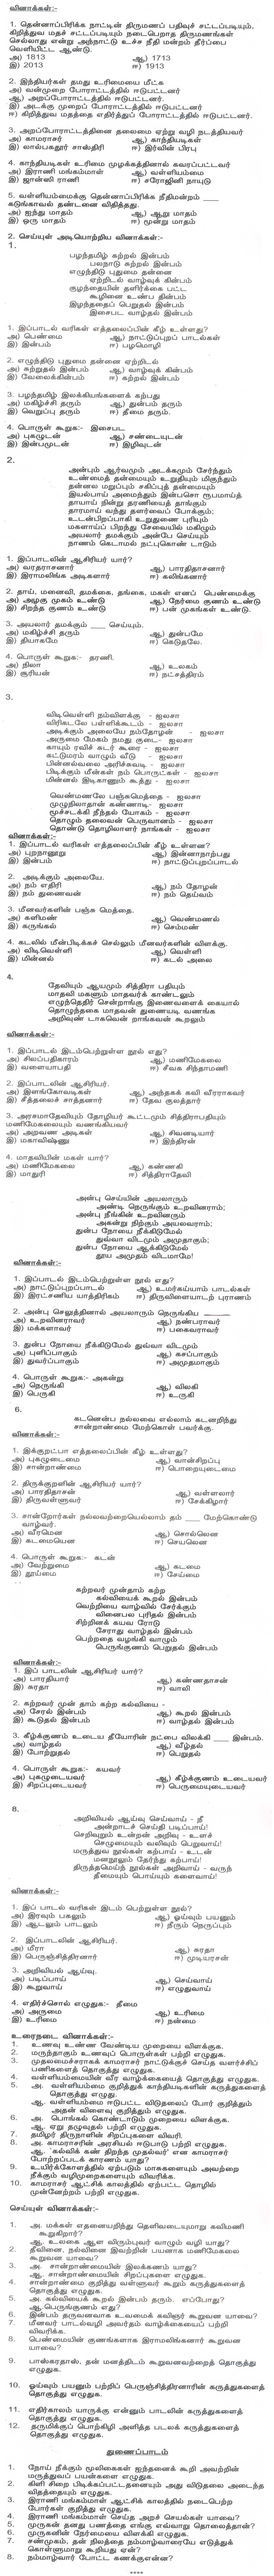 CBSE Class 9 Question Bank - Tamil